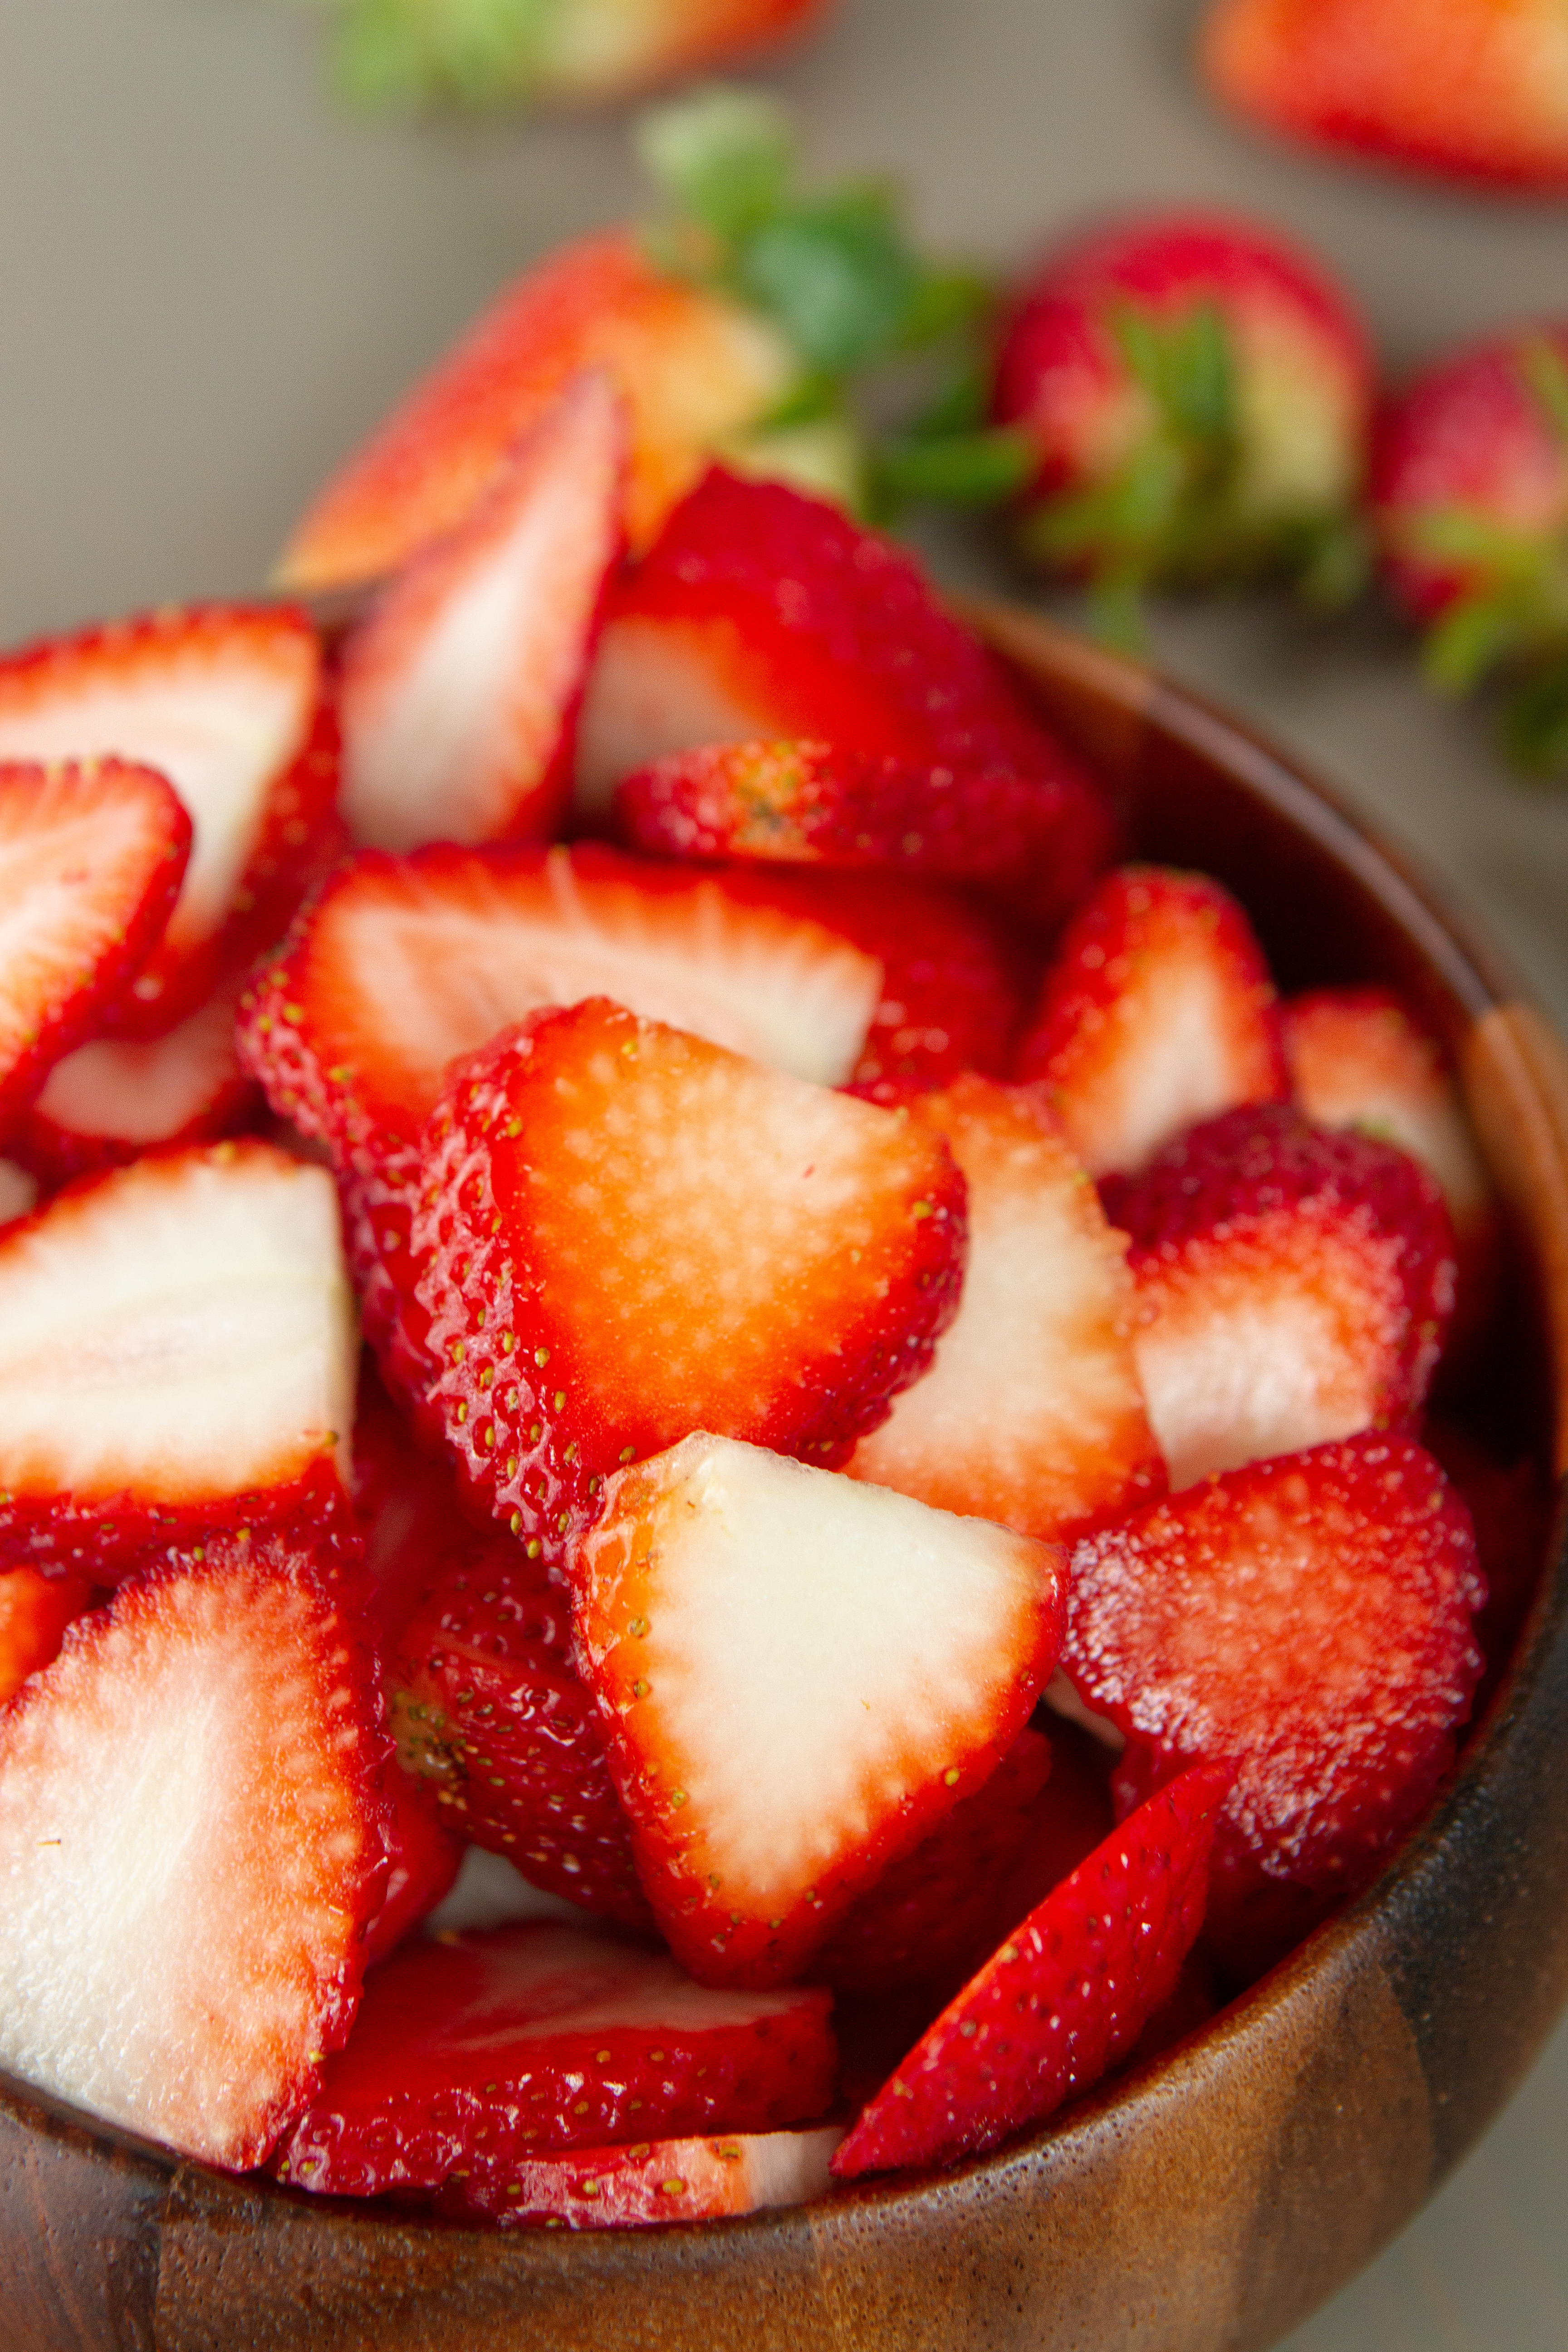 cut strawberries into slices